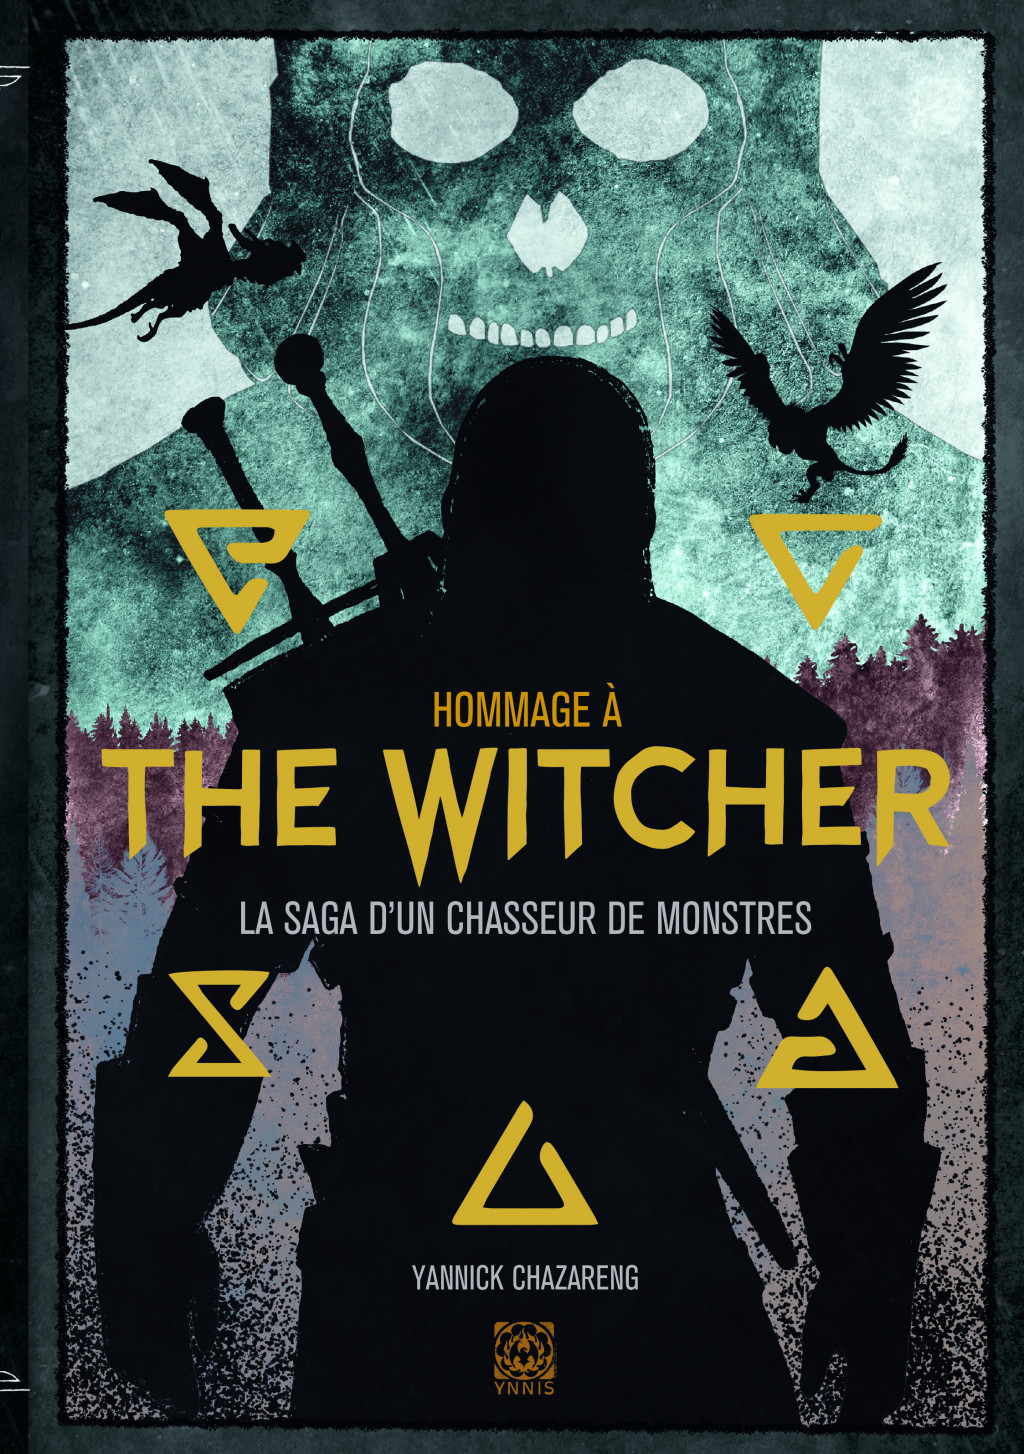 Hommage à The Witcher